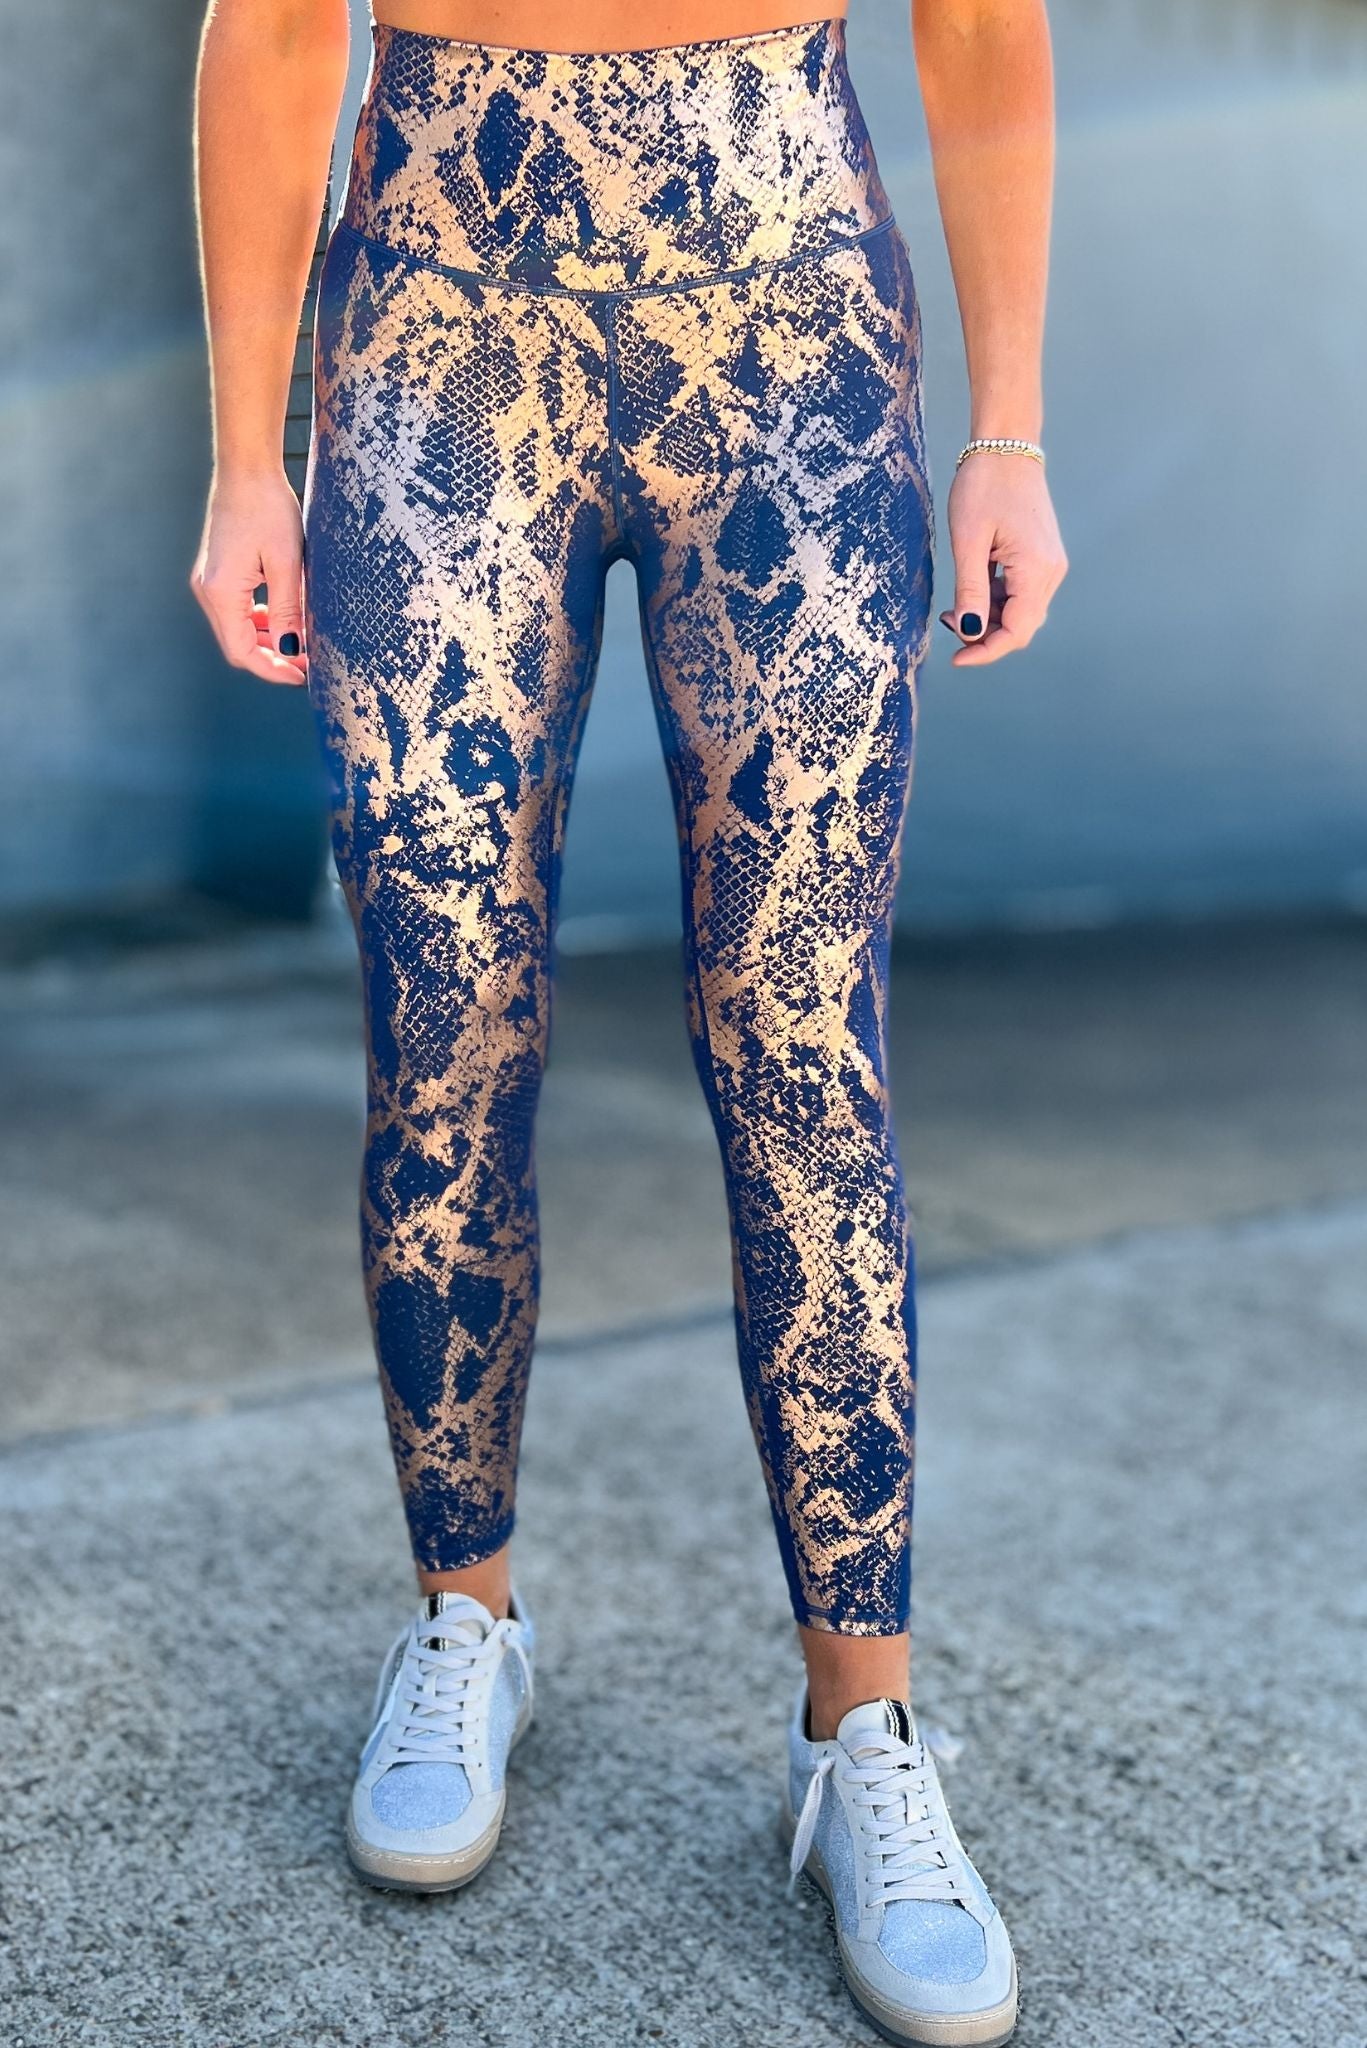 Copper Metallic Scale Print On Navy Active LeggingsSSYS The Label, athleisure, everyday wear, mom style, layered look, must have, shop style your senses by mallory fitzsimmons